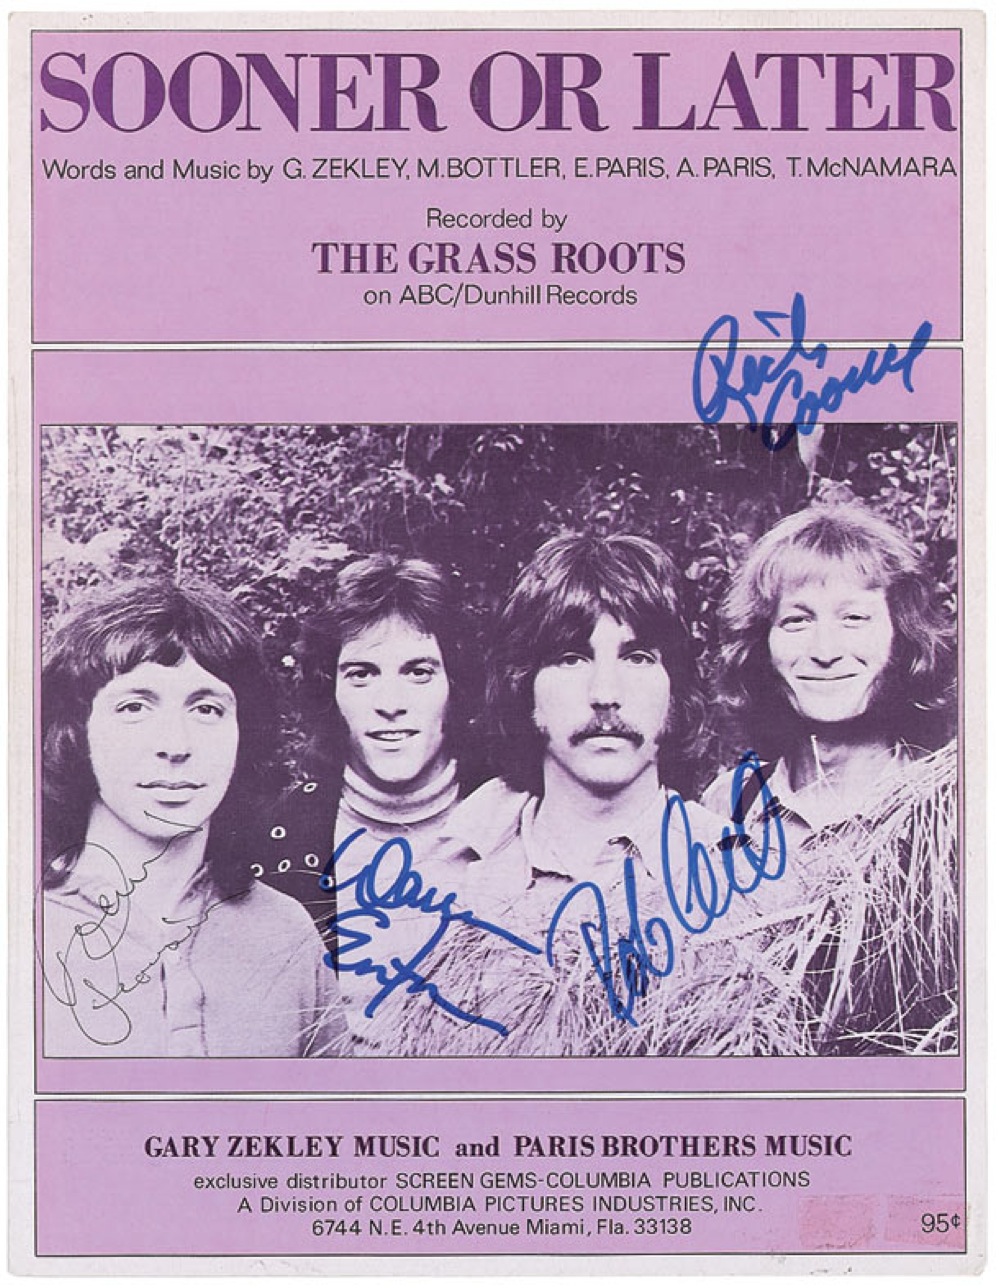 Lot #825 The Grass Roots